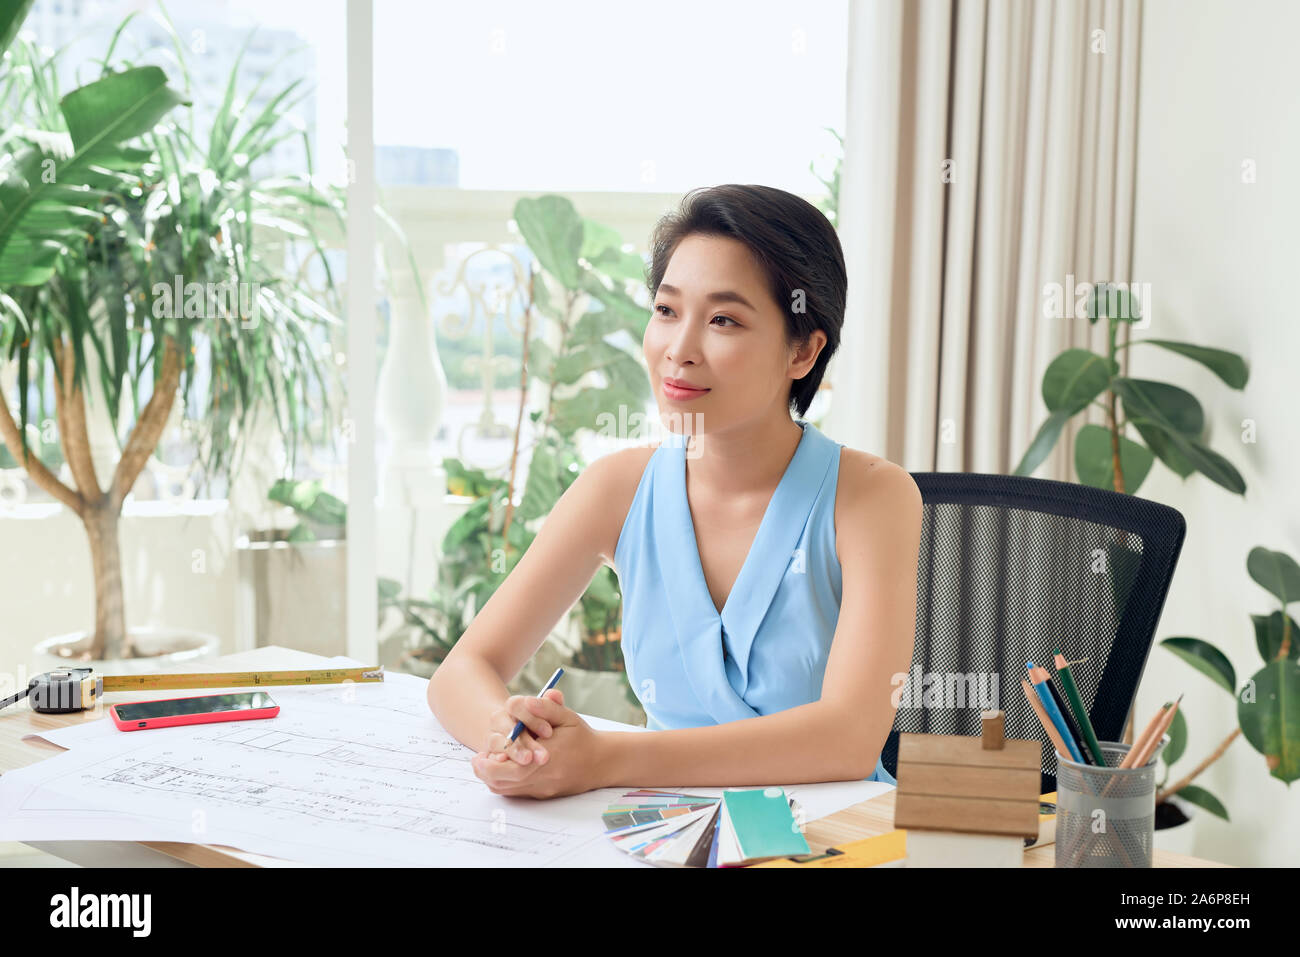 Young Asian woman working on engineering project Stock Photo